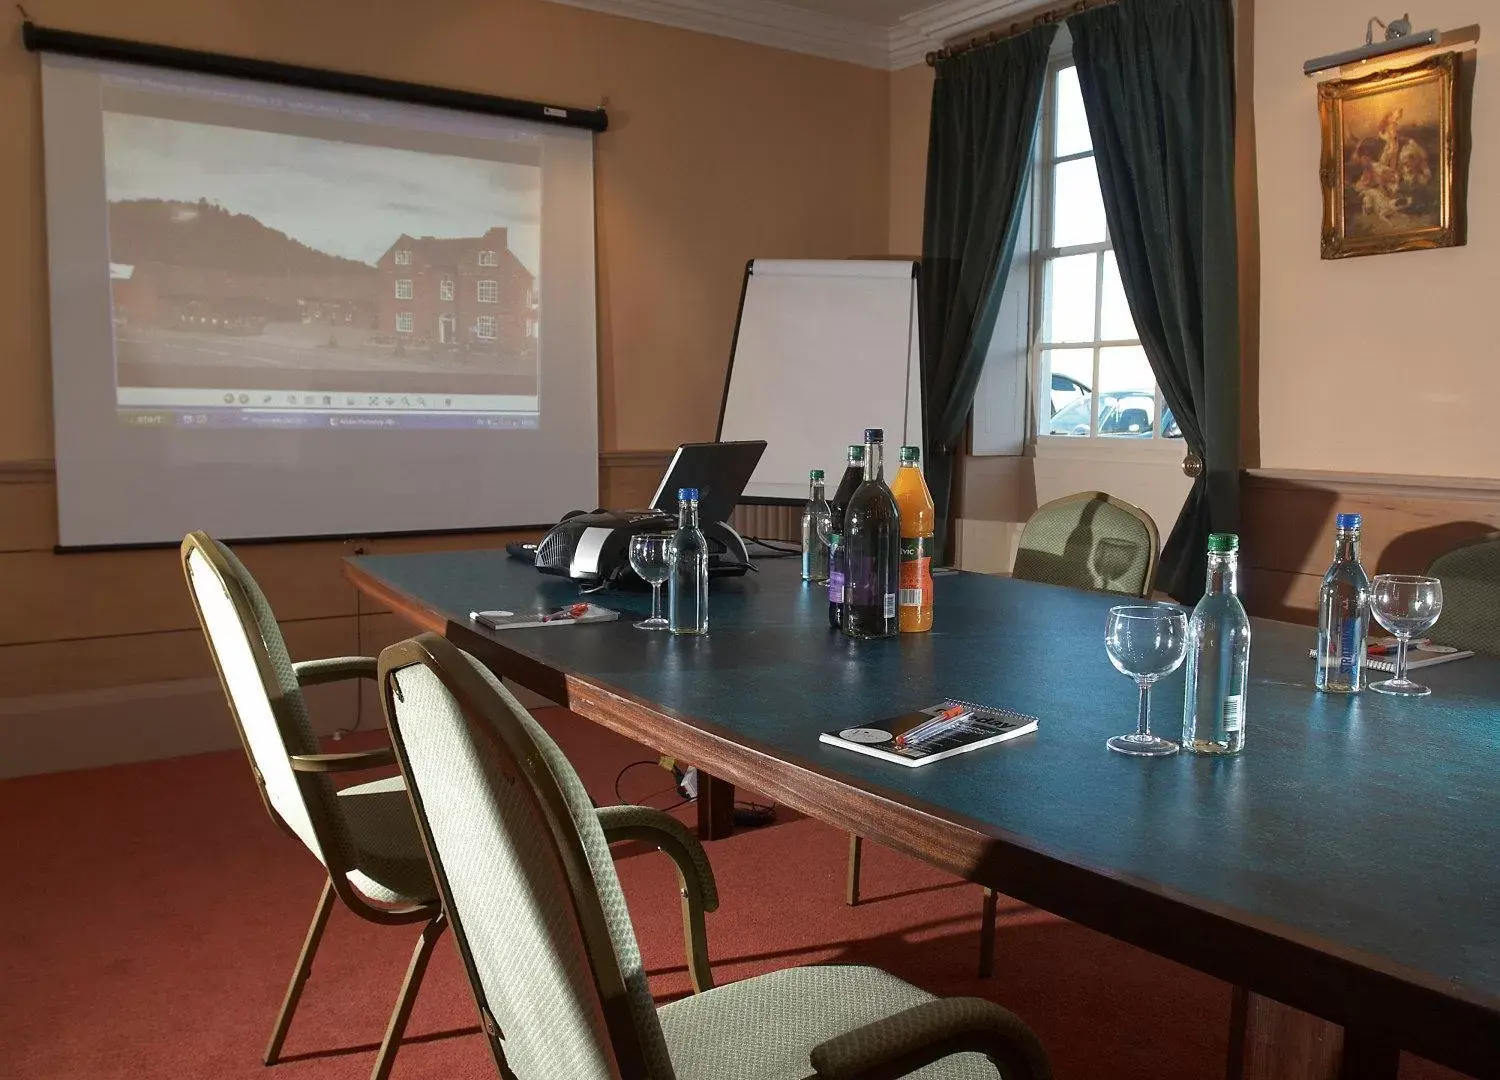 Business facilities in The Barns Hotel